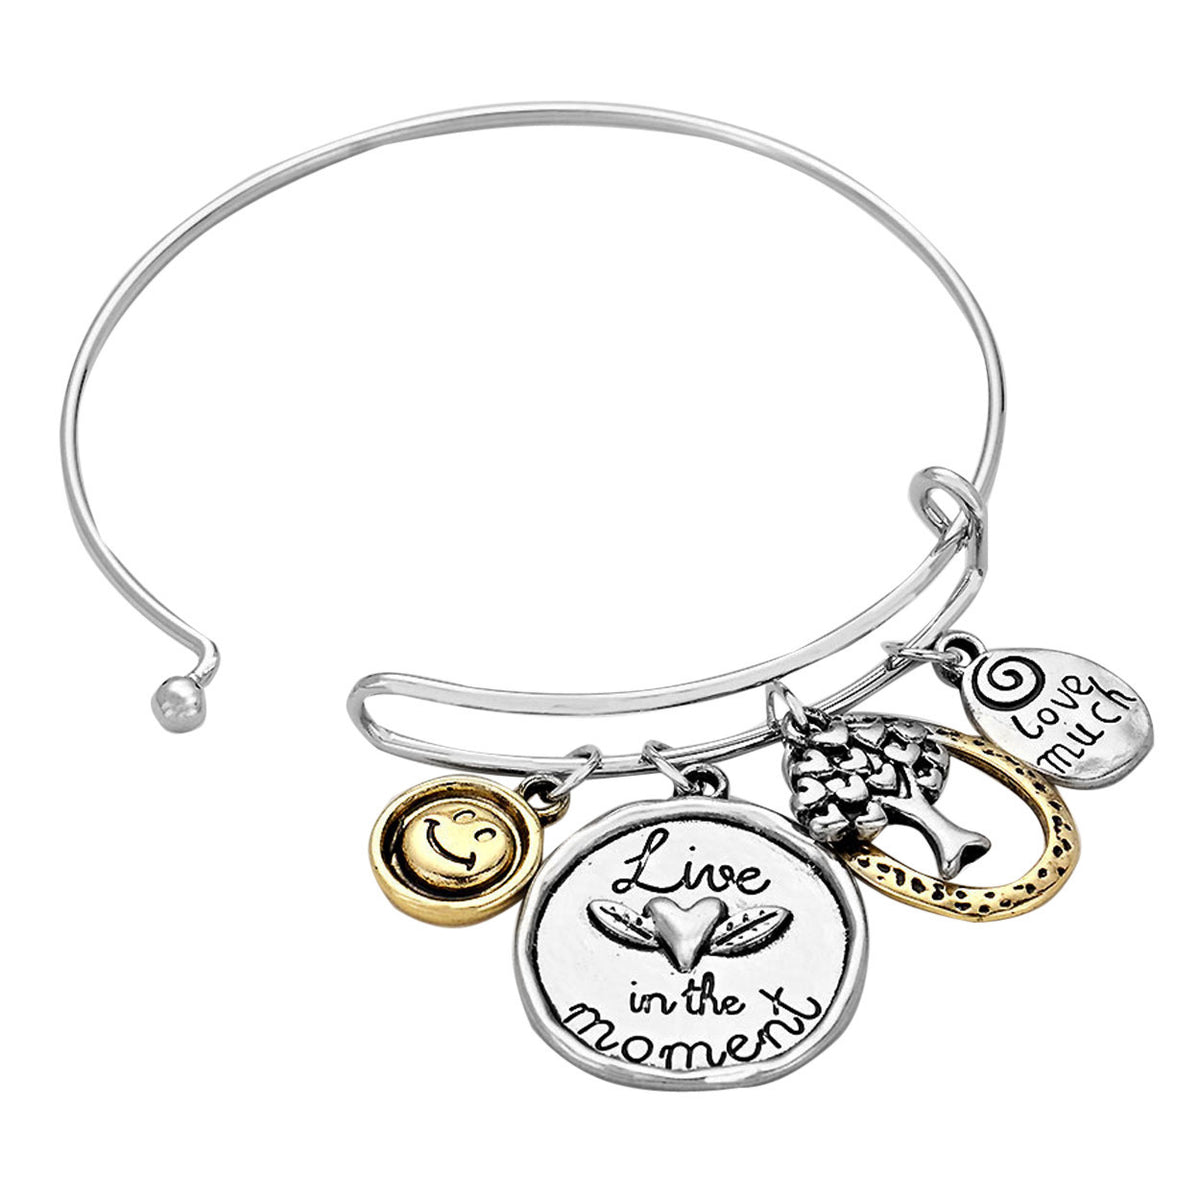 Introducing our "Monthly Featured Bracelet"